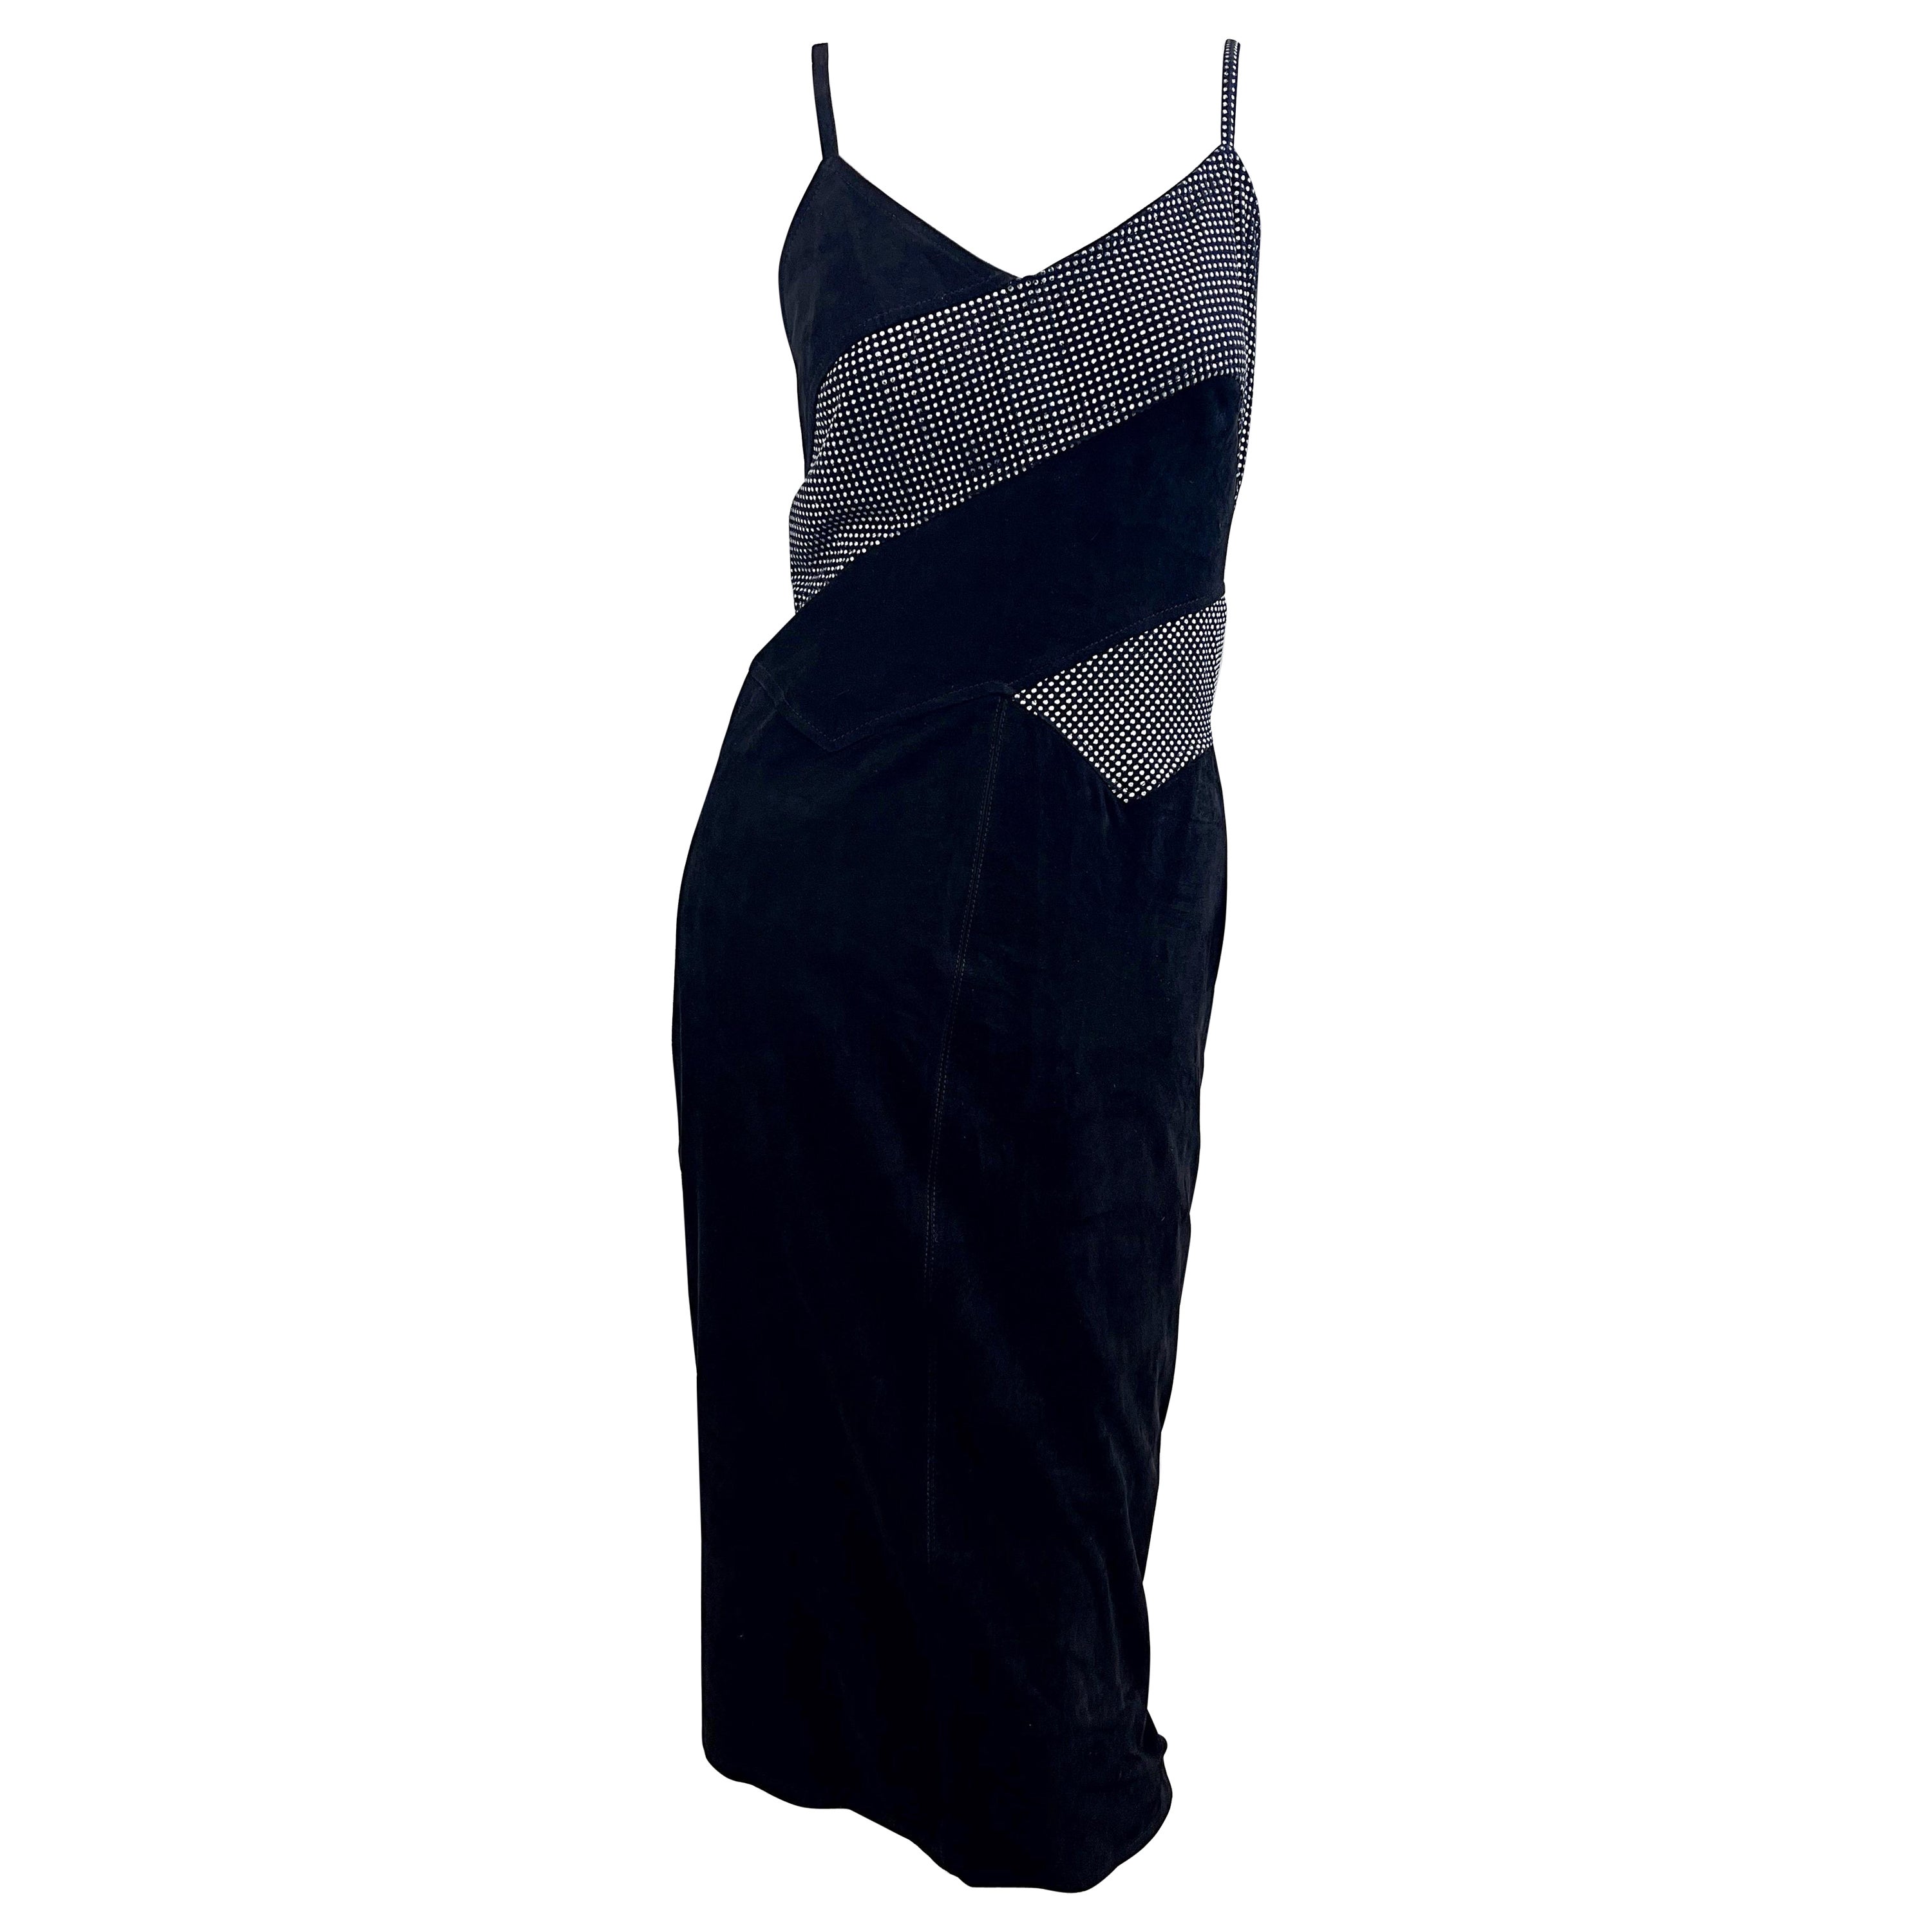 Fendi 1980s Fendissime Black Silver Suede Leather Vintage 80s Hand Painted Dress For Sale